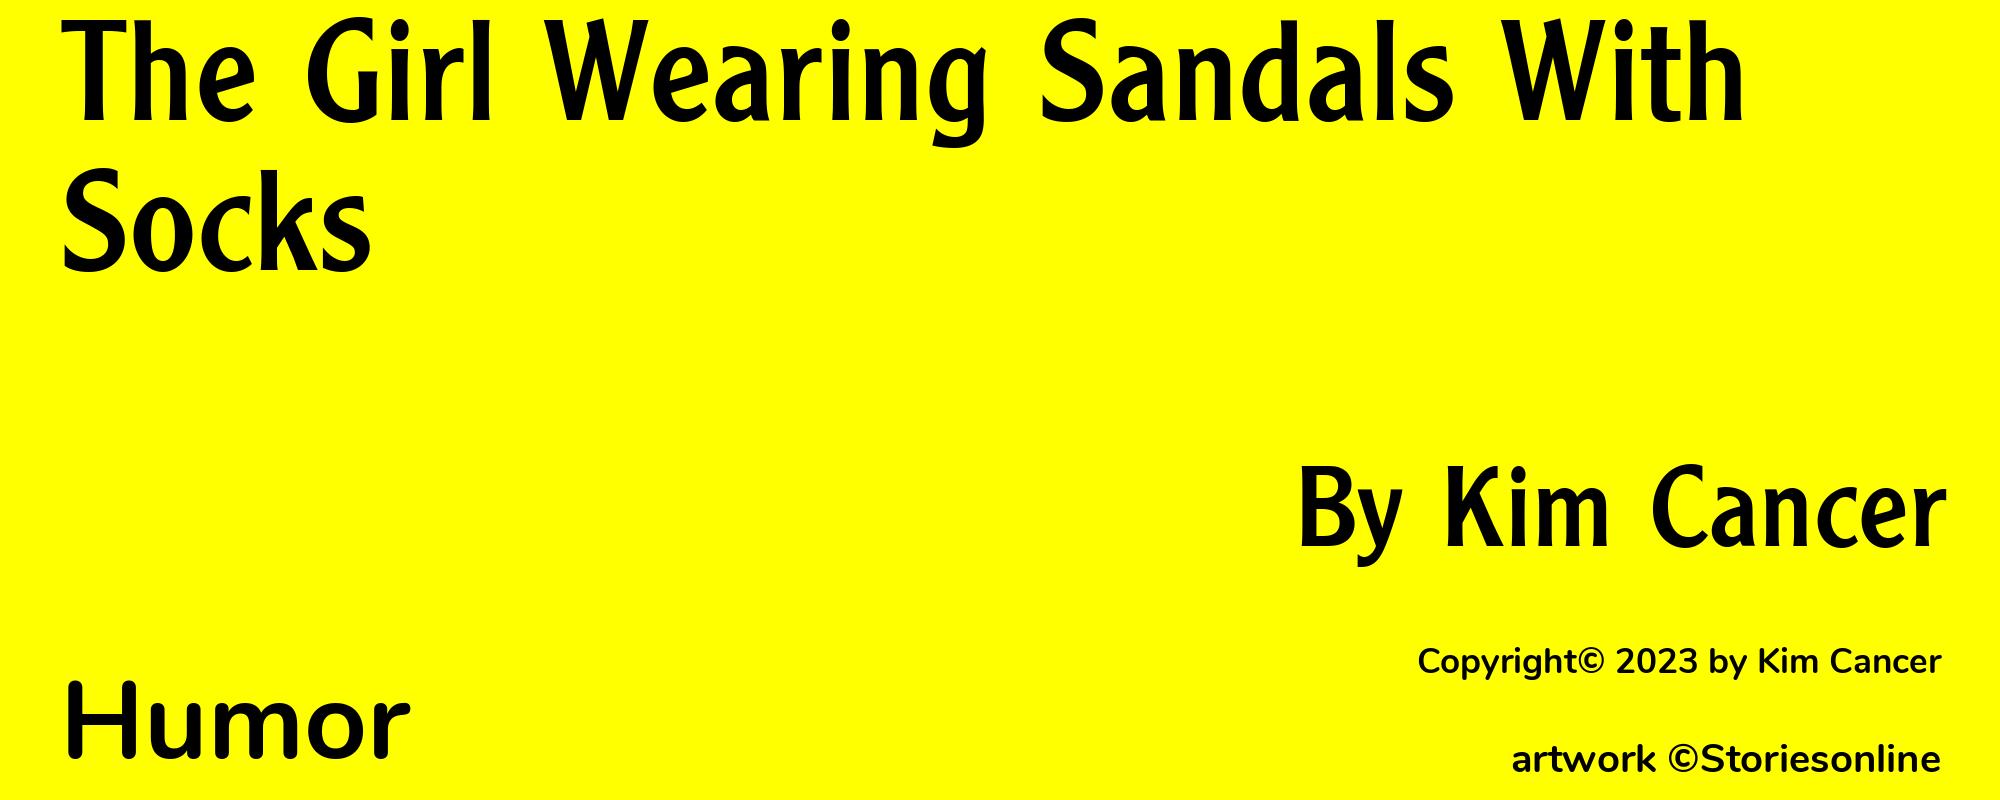 The Girl Wearing Sandals With Socks - Cover